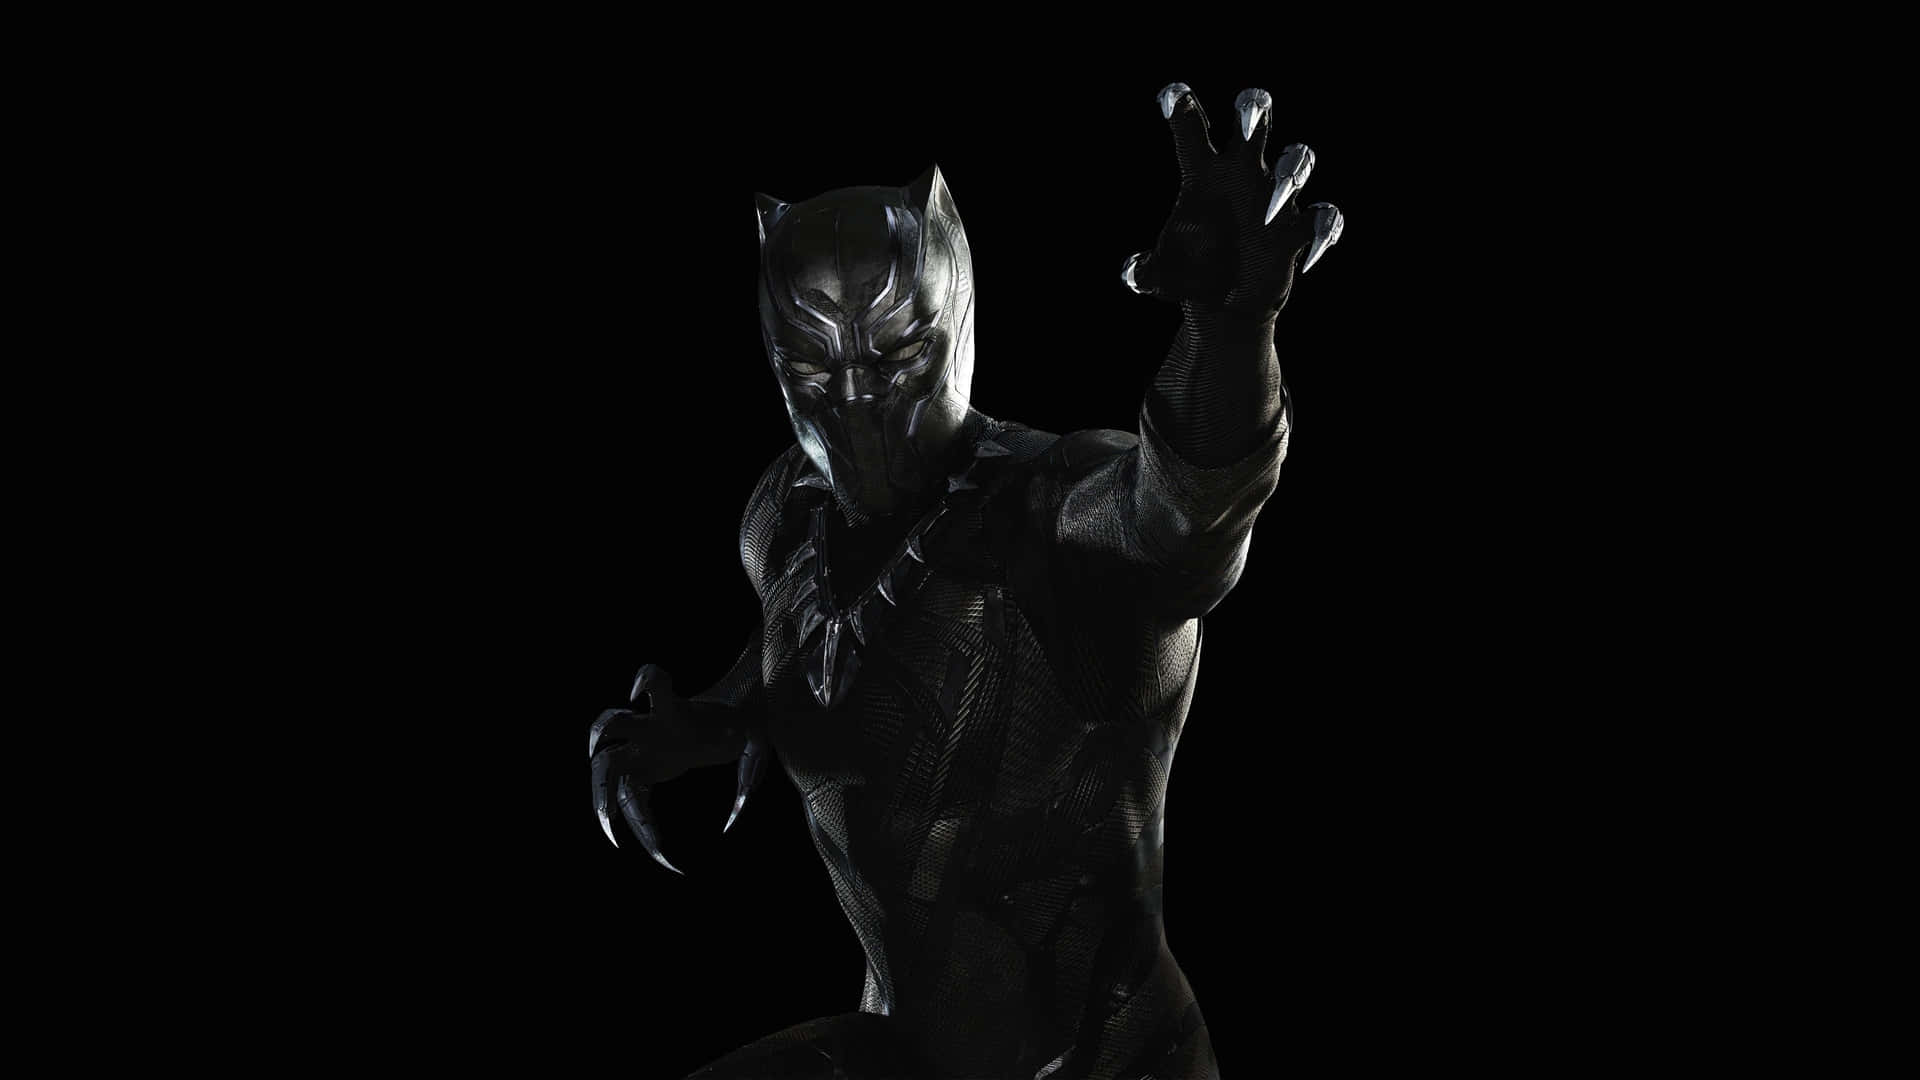 The Black Panther - a heroic figure fighting for justice Wallpaper